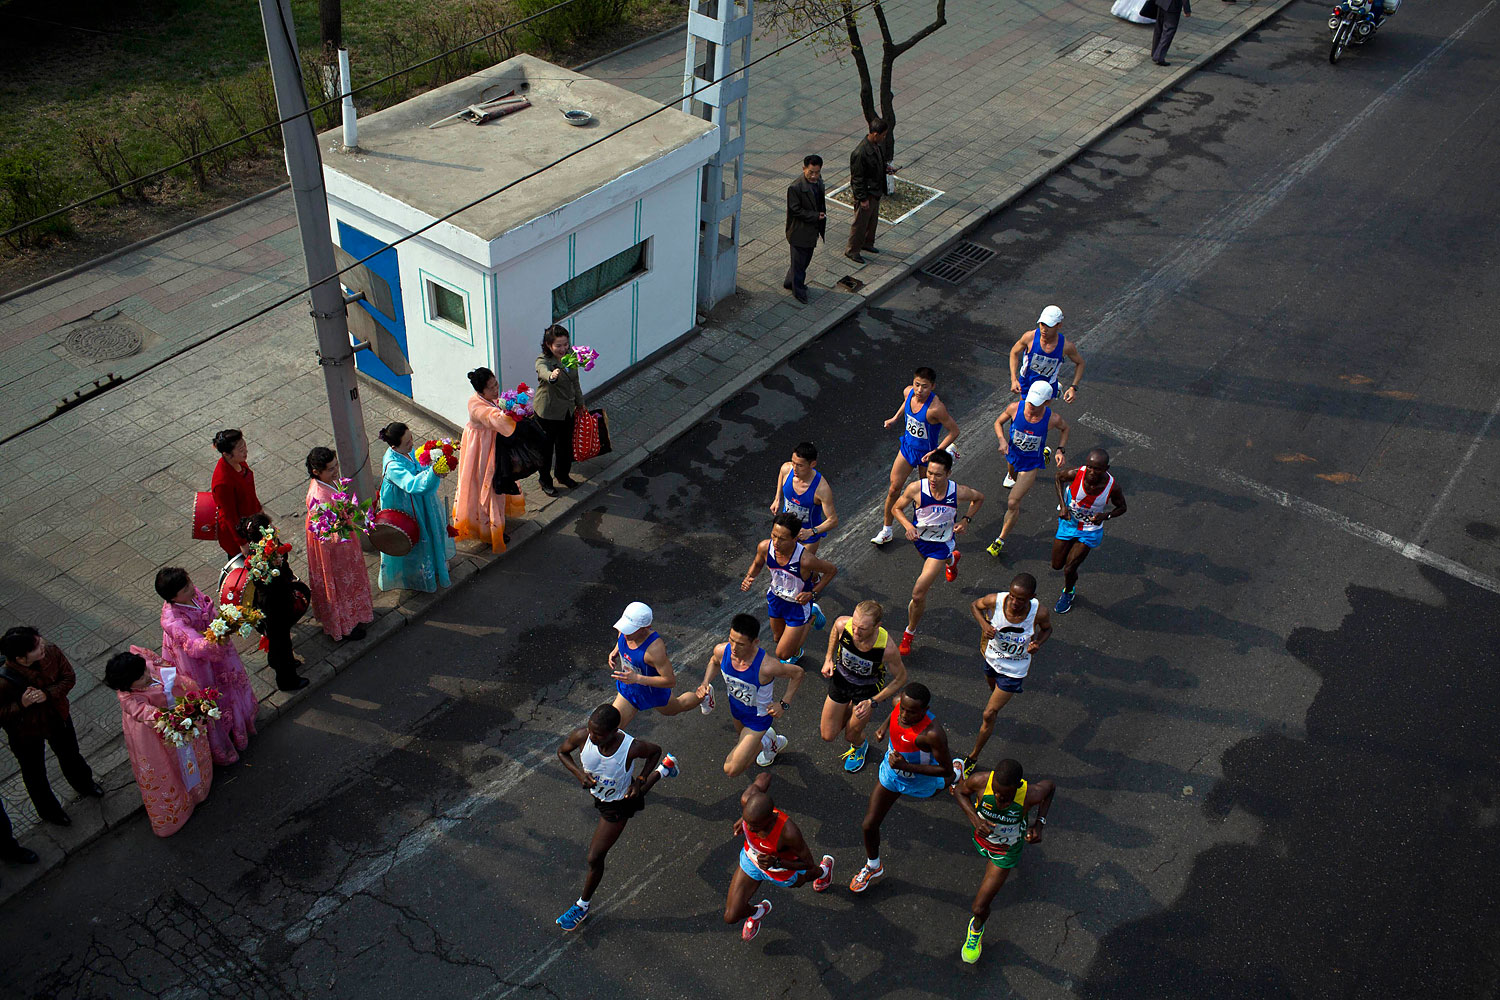 The lead pack of runners are cheered on by North Korean spectators on the roadside in central Pyongyang during the running of the Mangyongdae Prize International Marathon in Pyongyang on April 13, 2014.